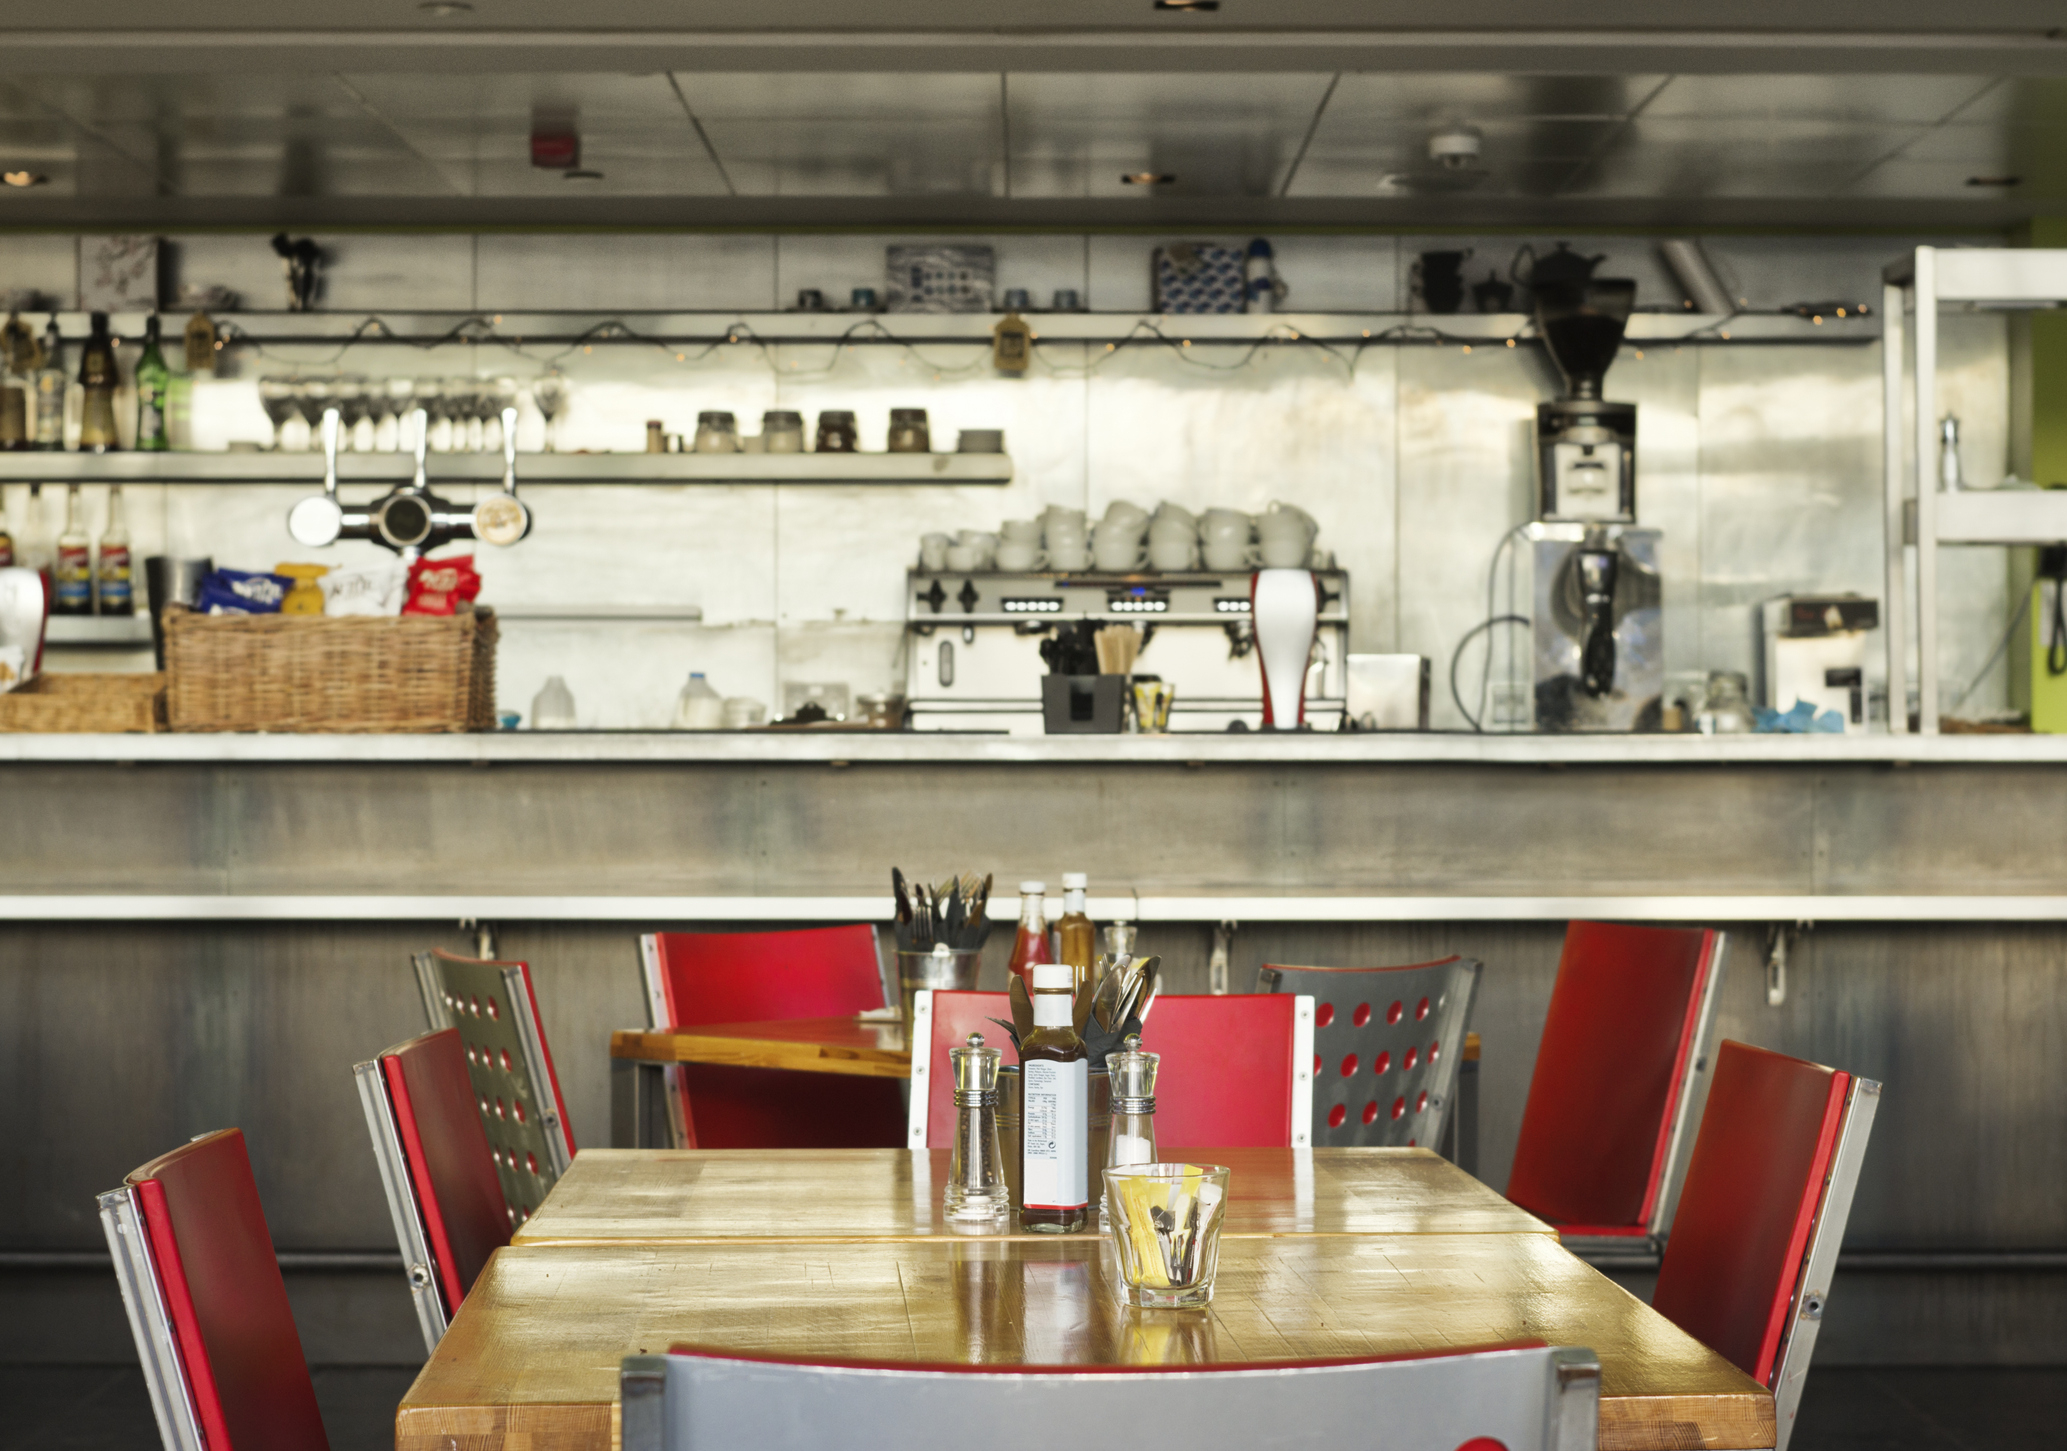 Diner interior with empty red chairs at tables and a view of the open kitchen area in the background